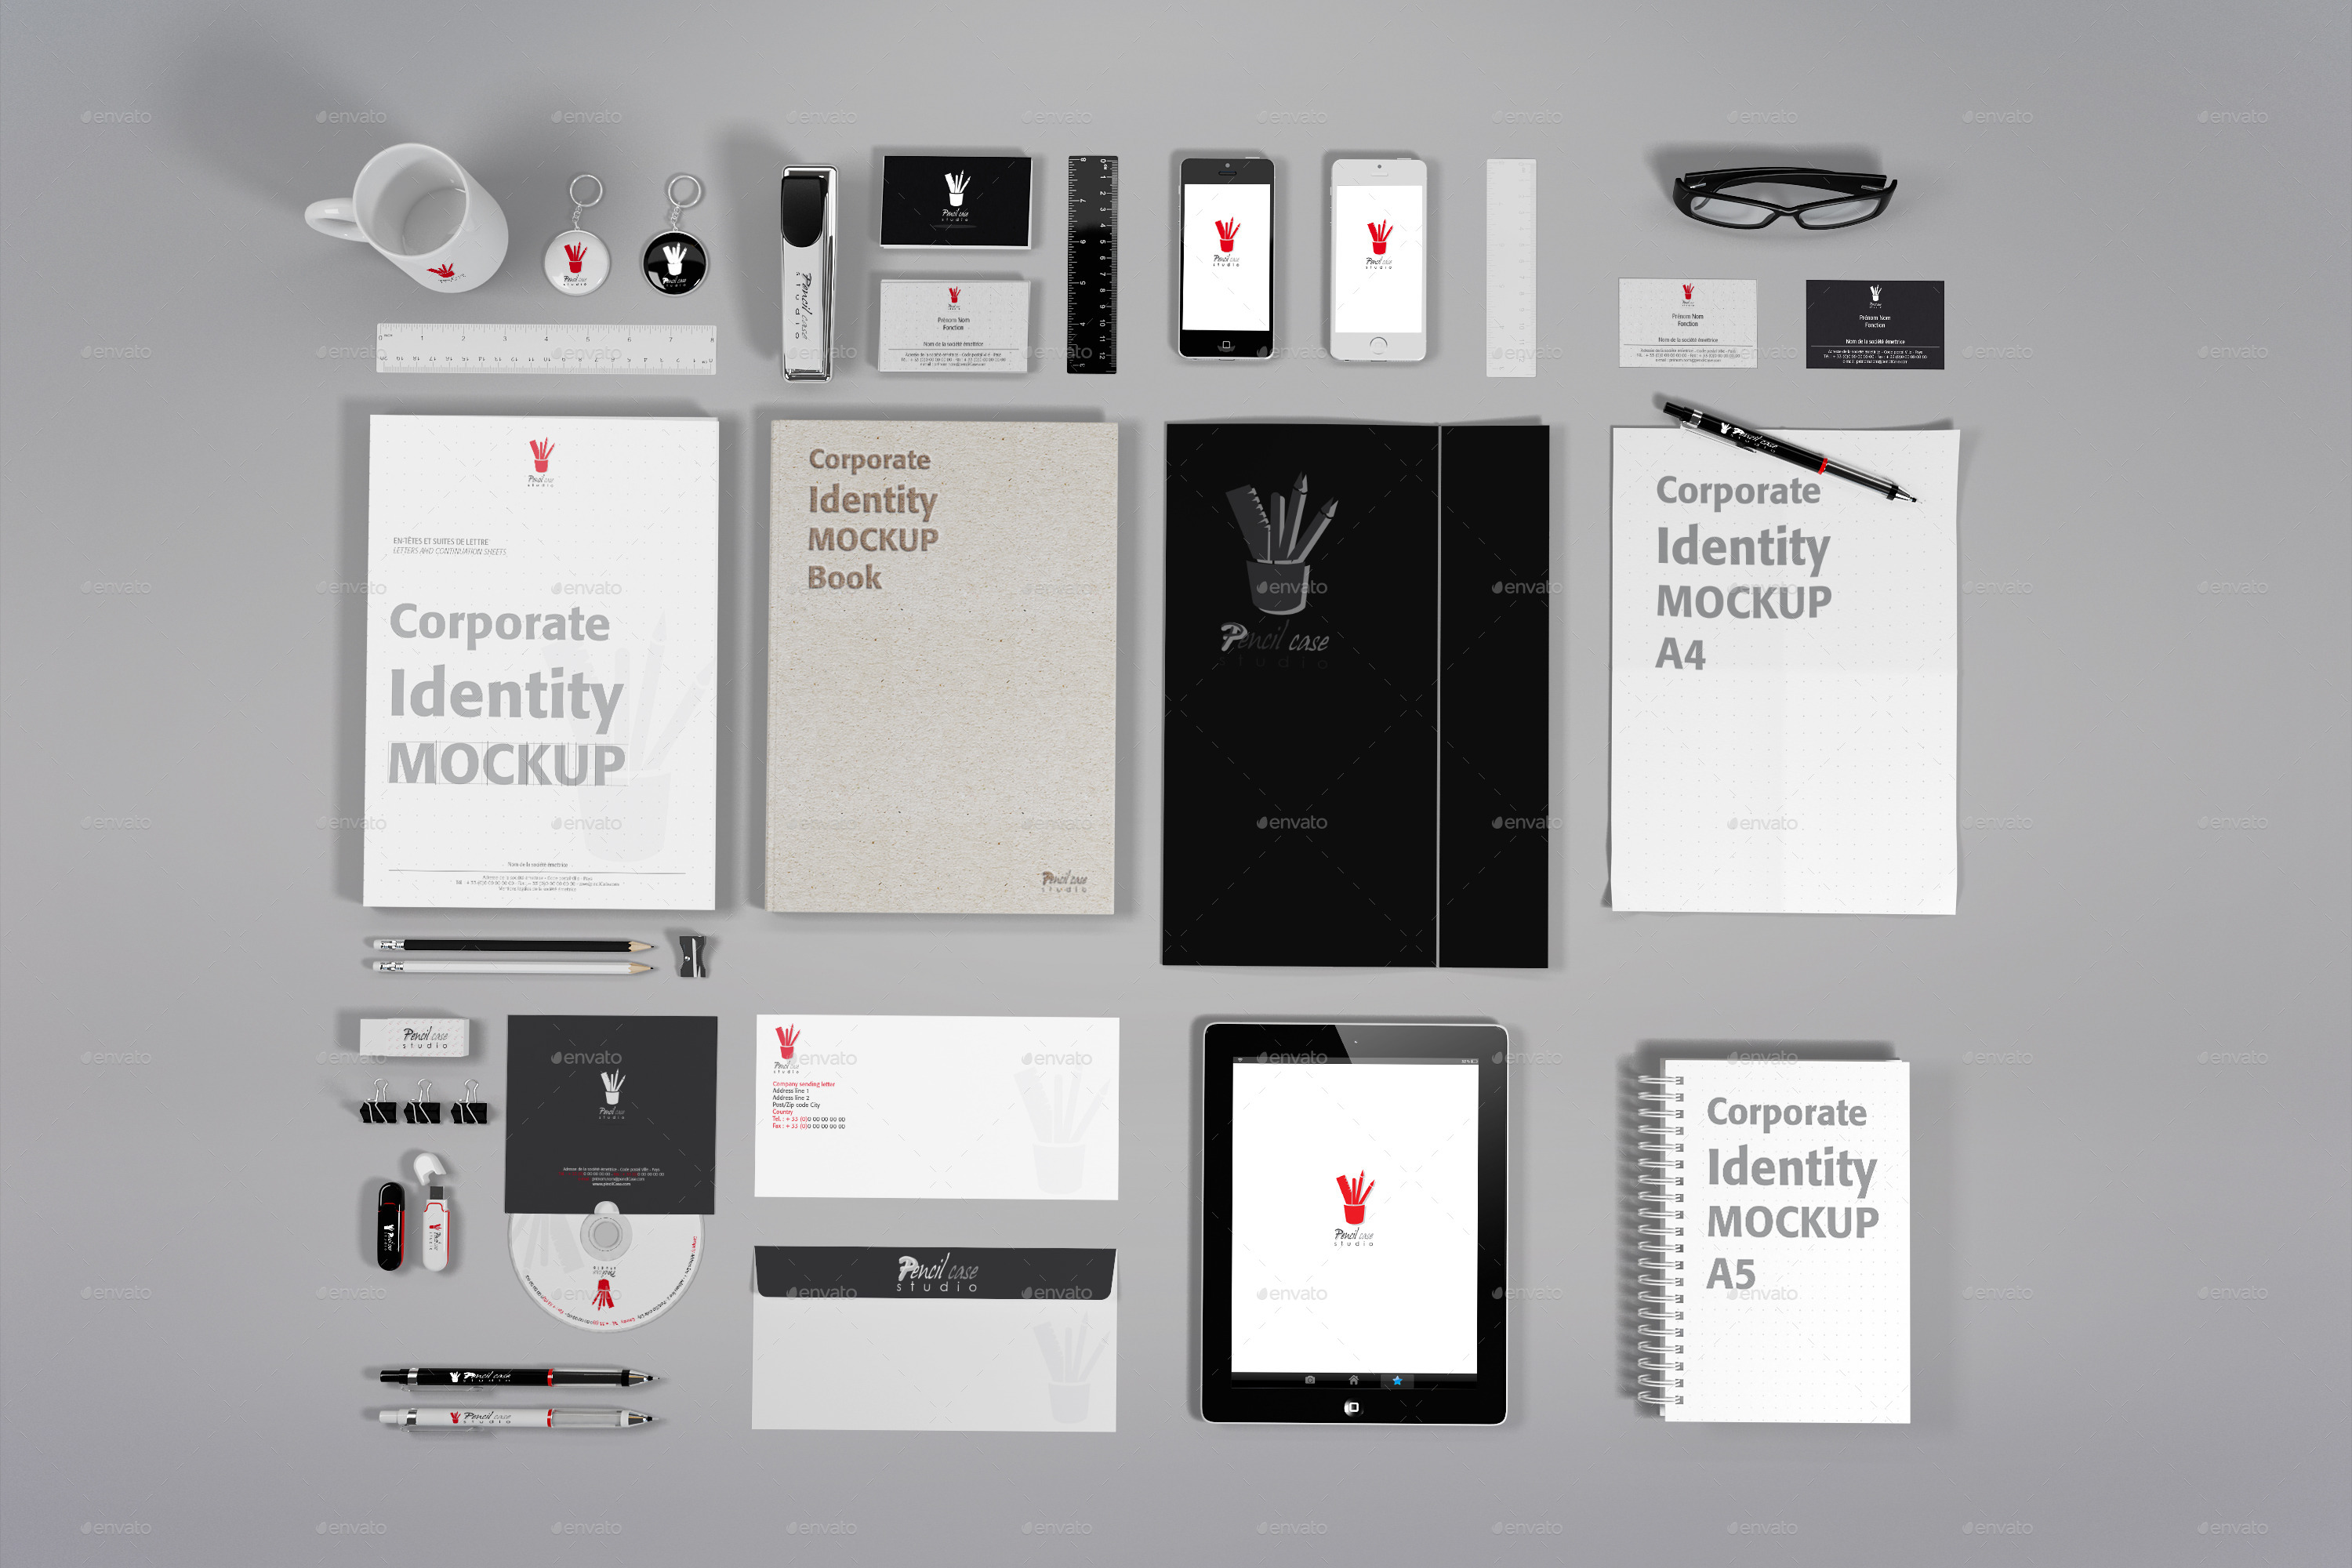 Download Corporate Identity Mockup V2 by prodessin | GraphicRiver